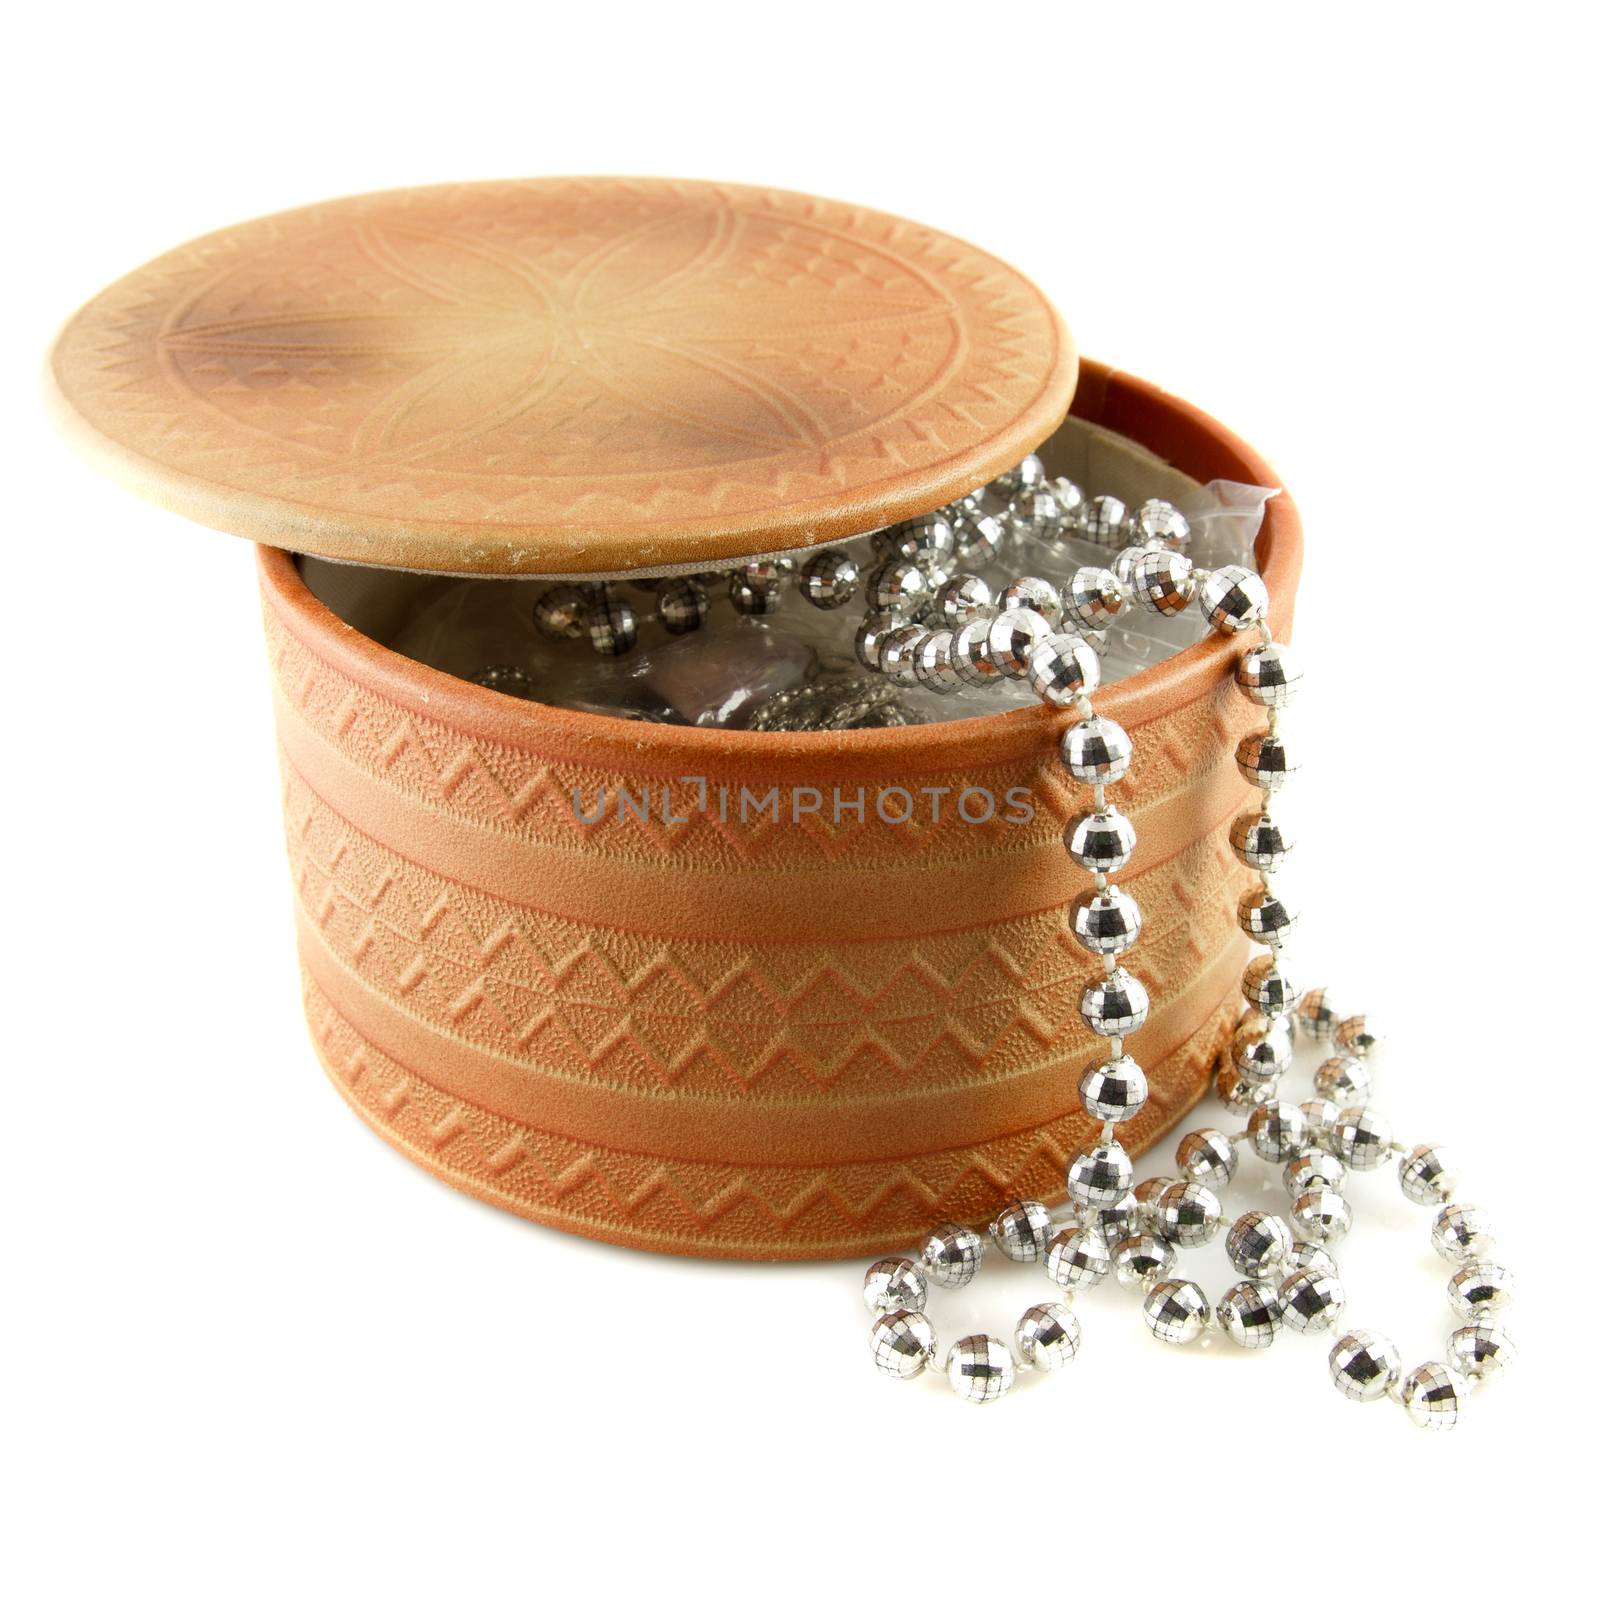 Leather box with jewelry on a white background